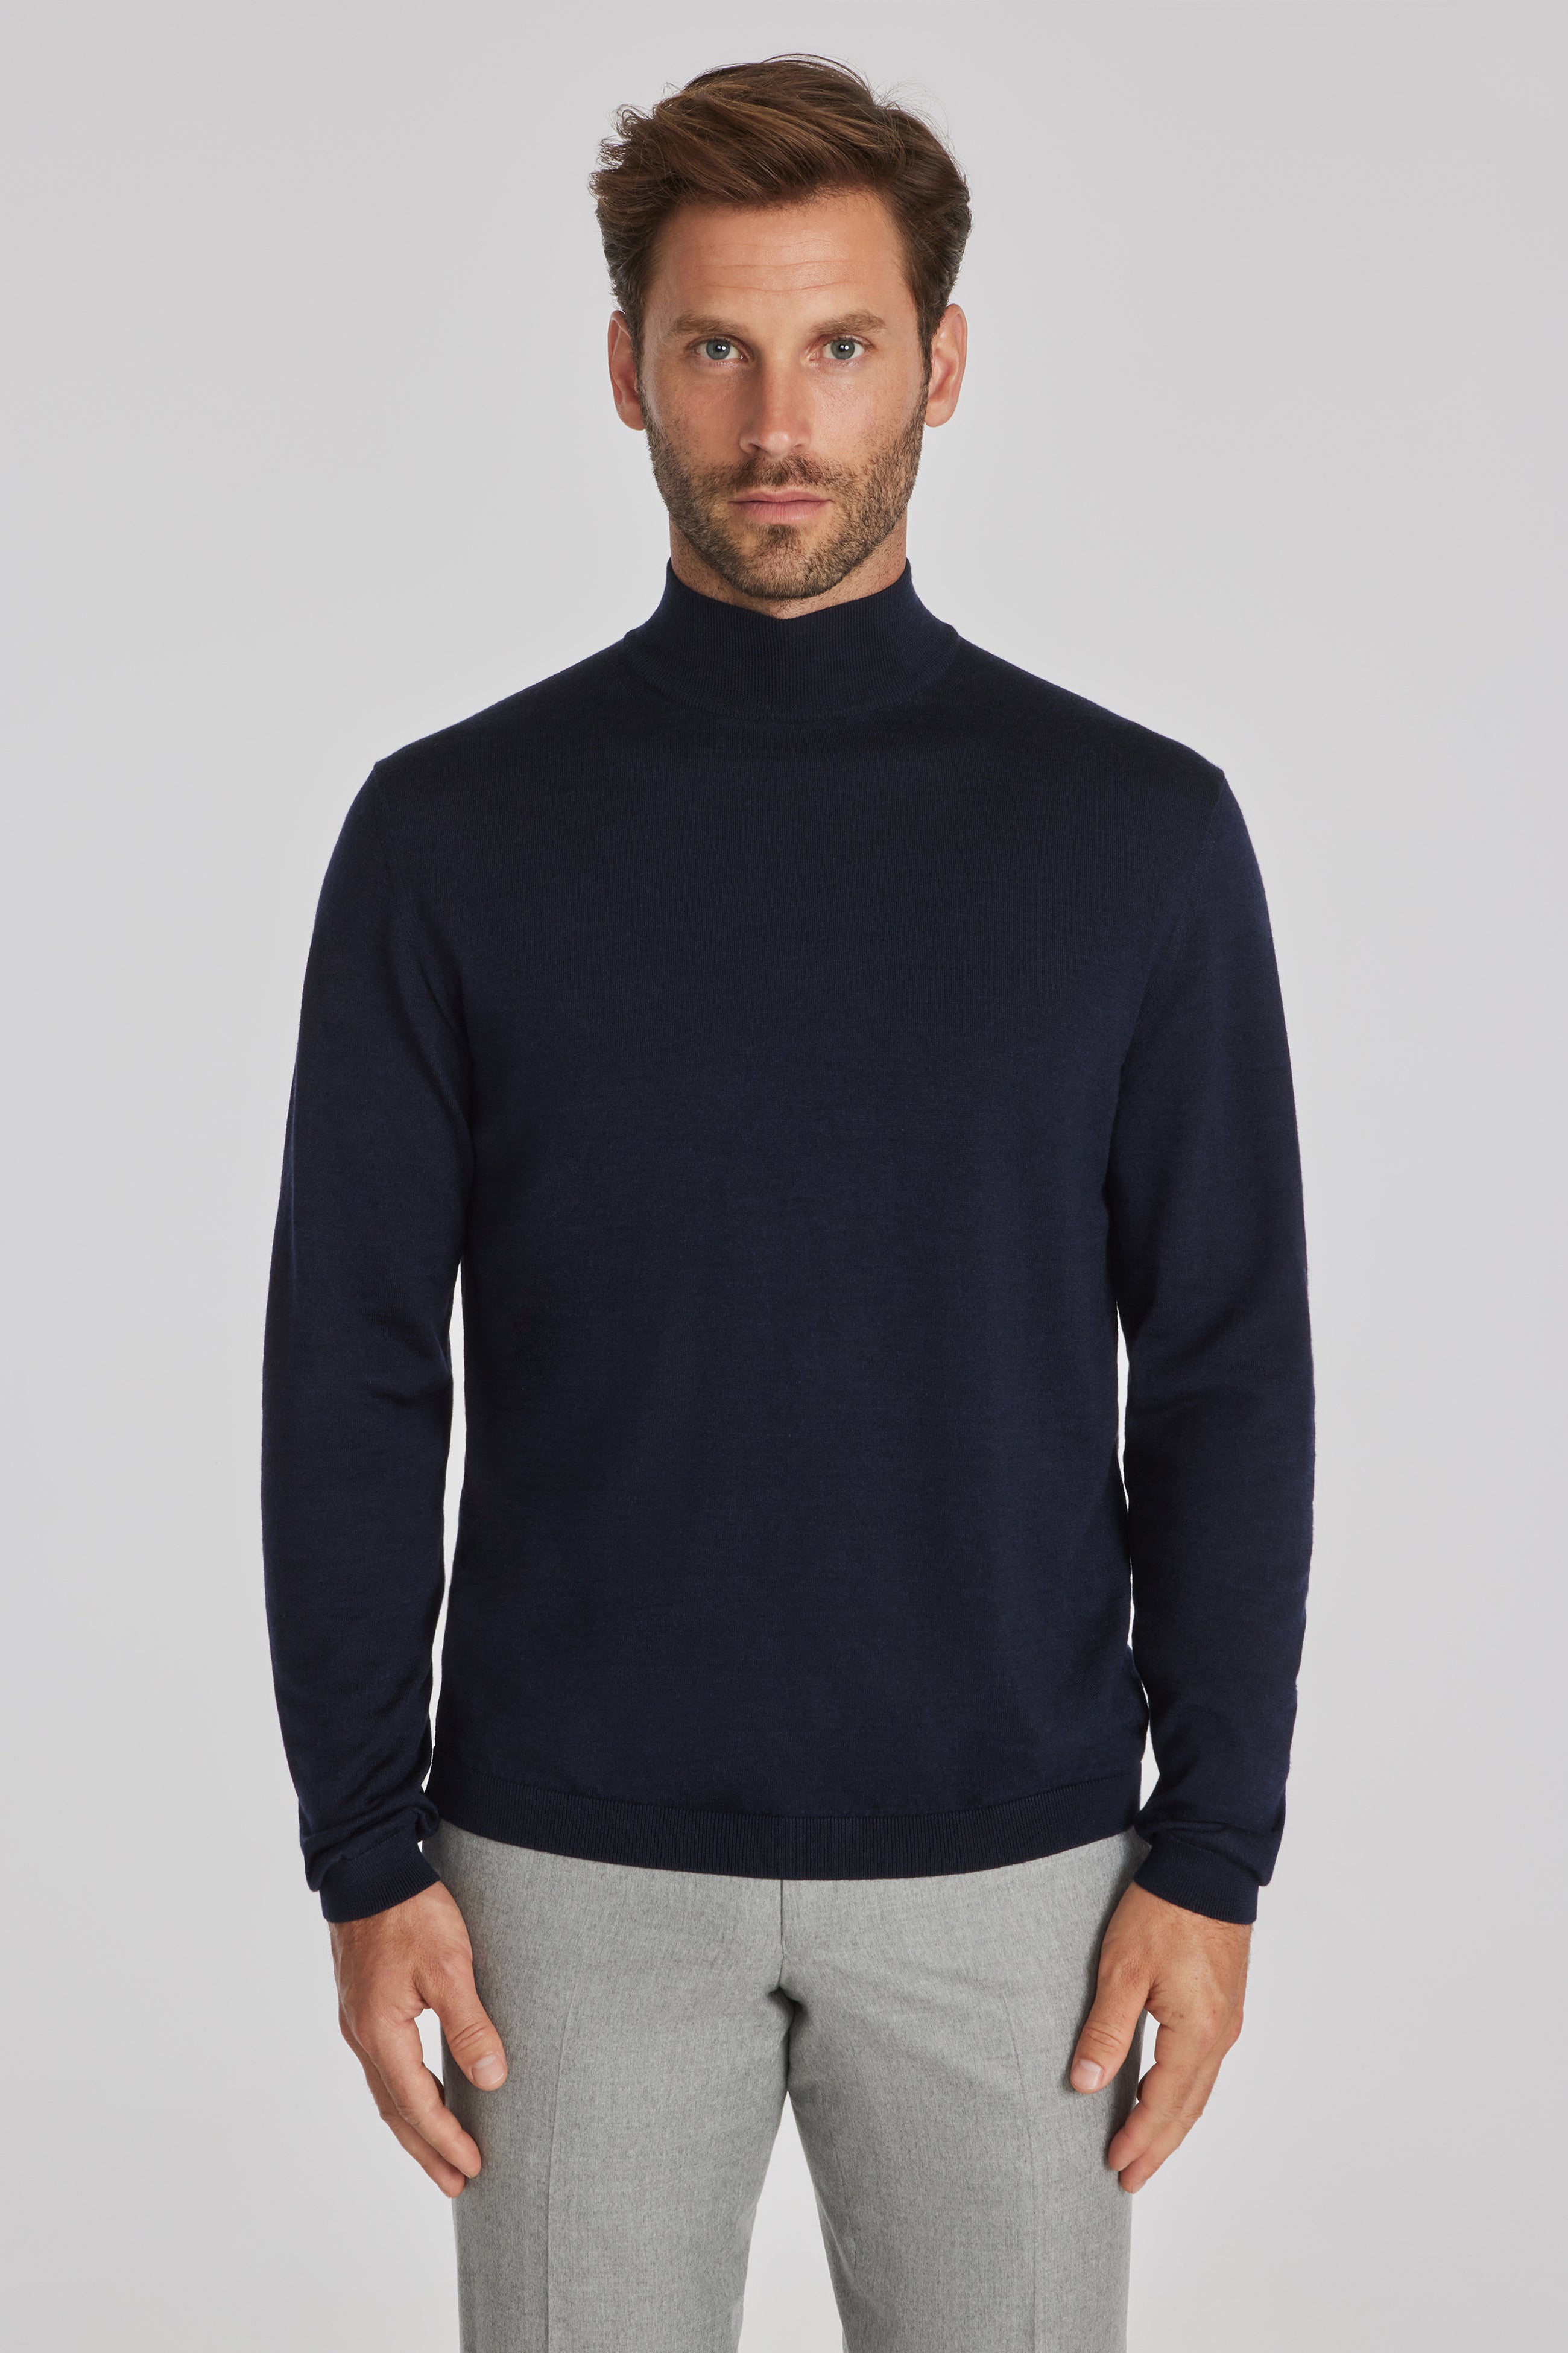 Jack Victor Men's Beaudry Navy Wool, Silk and Cashmere Mock Neck Sweater